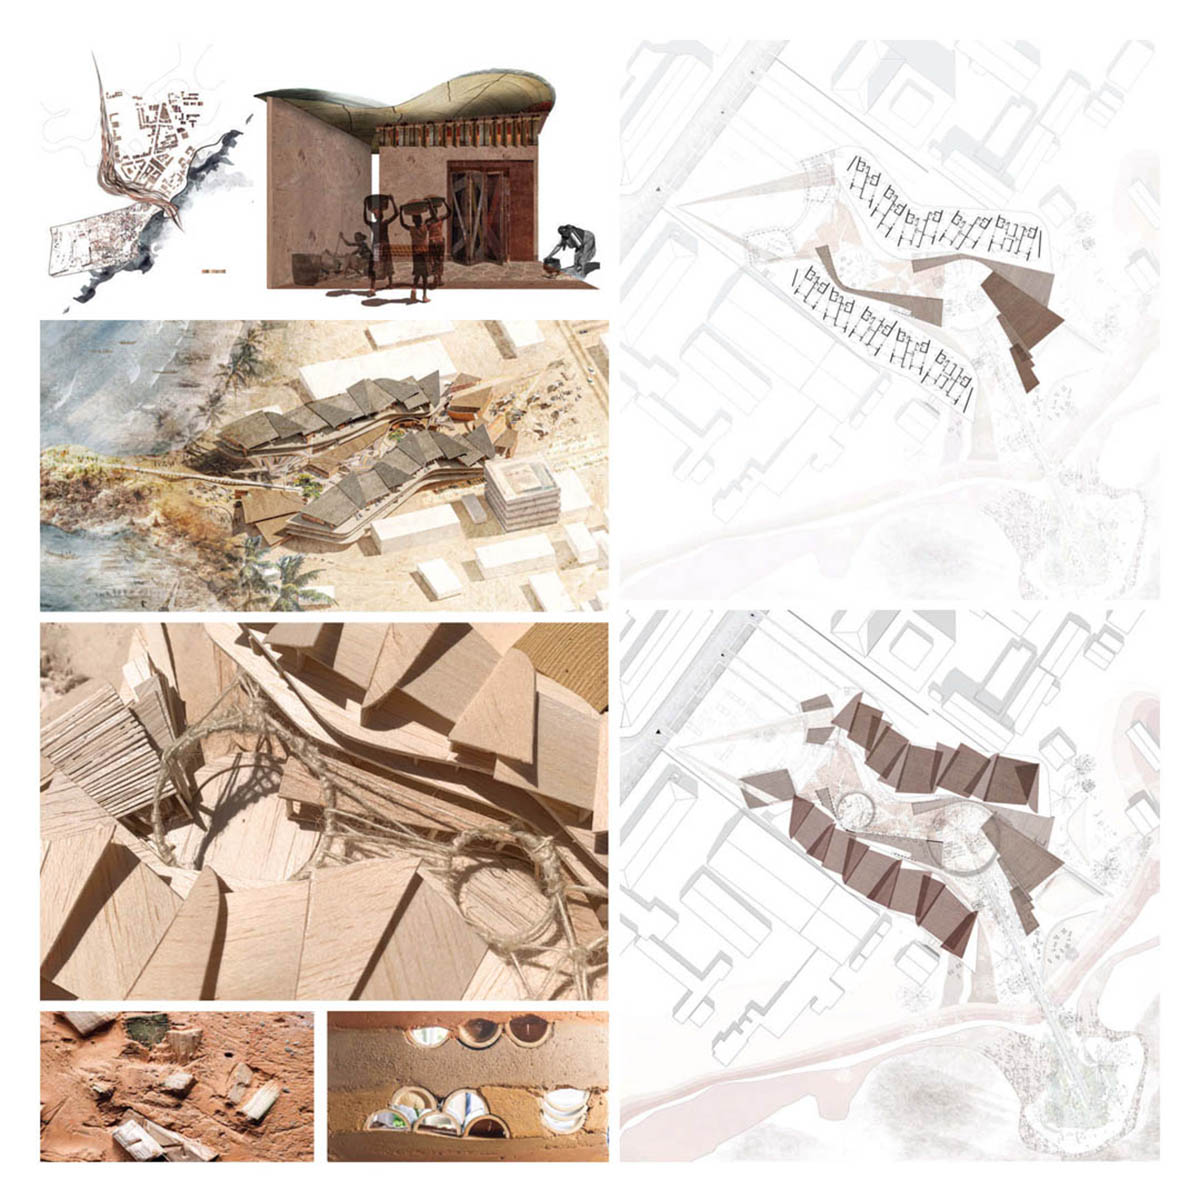 Winners announced for Architecture Thesis of the Year 2020